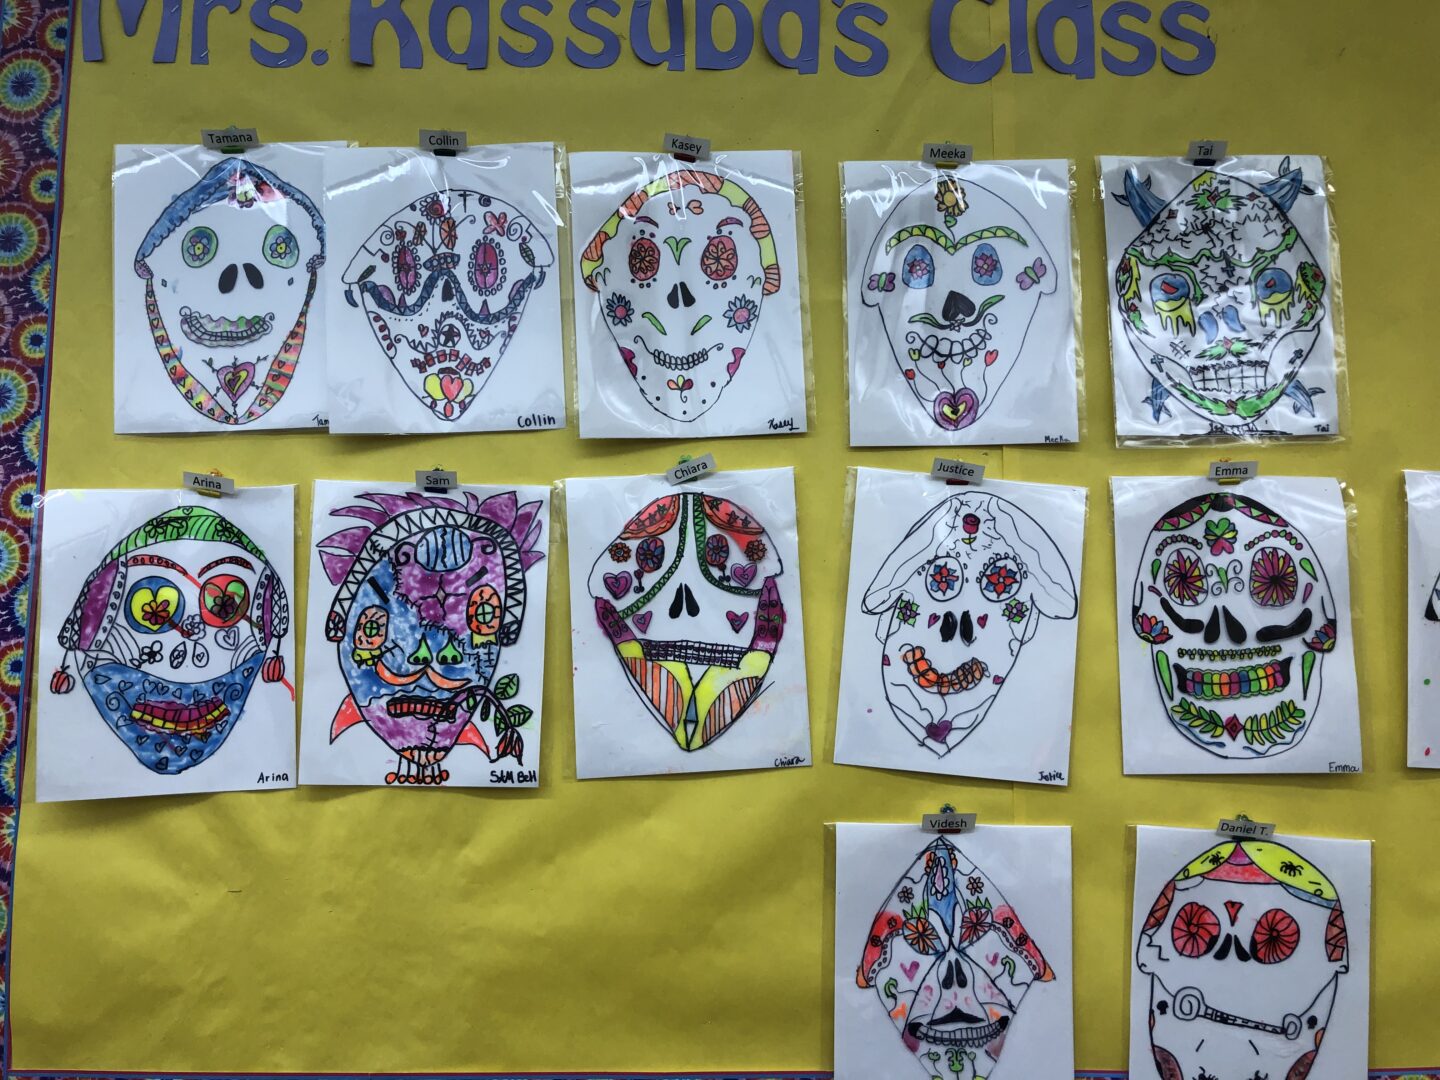 Frida Kahlo inspired Reserve Sugar Skulls created by students from Grade 5. Follow @How2playtoday for more exciting activities.